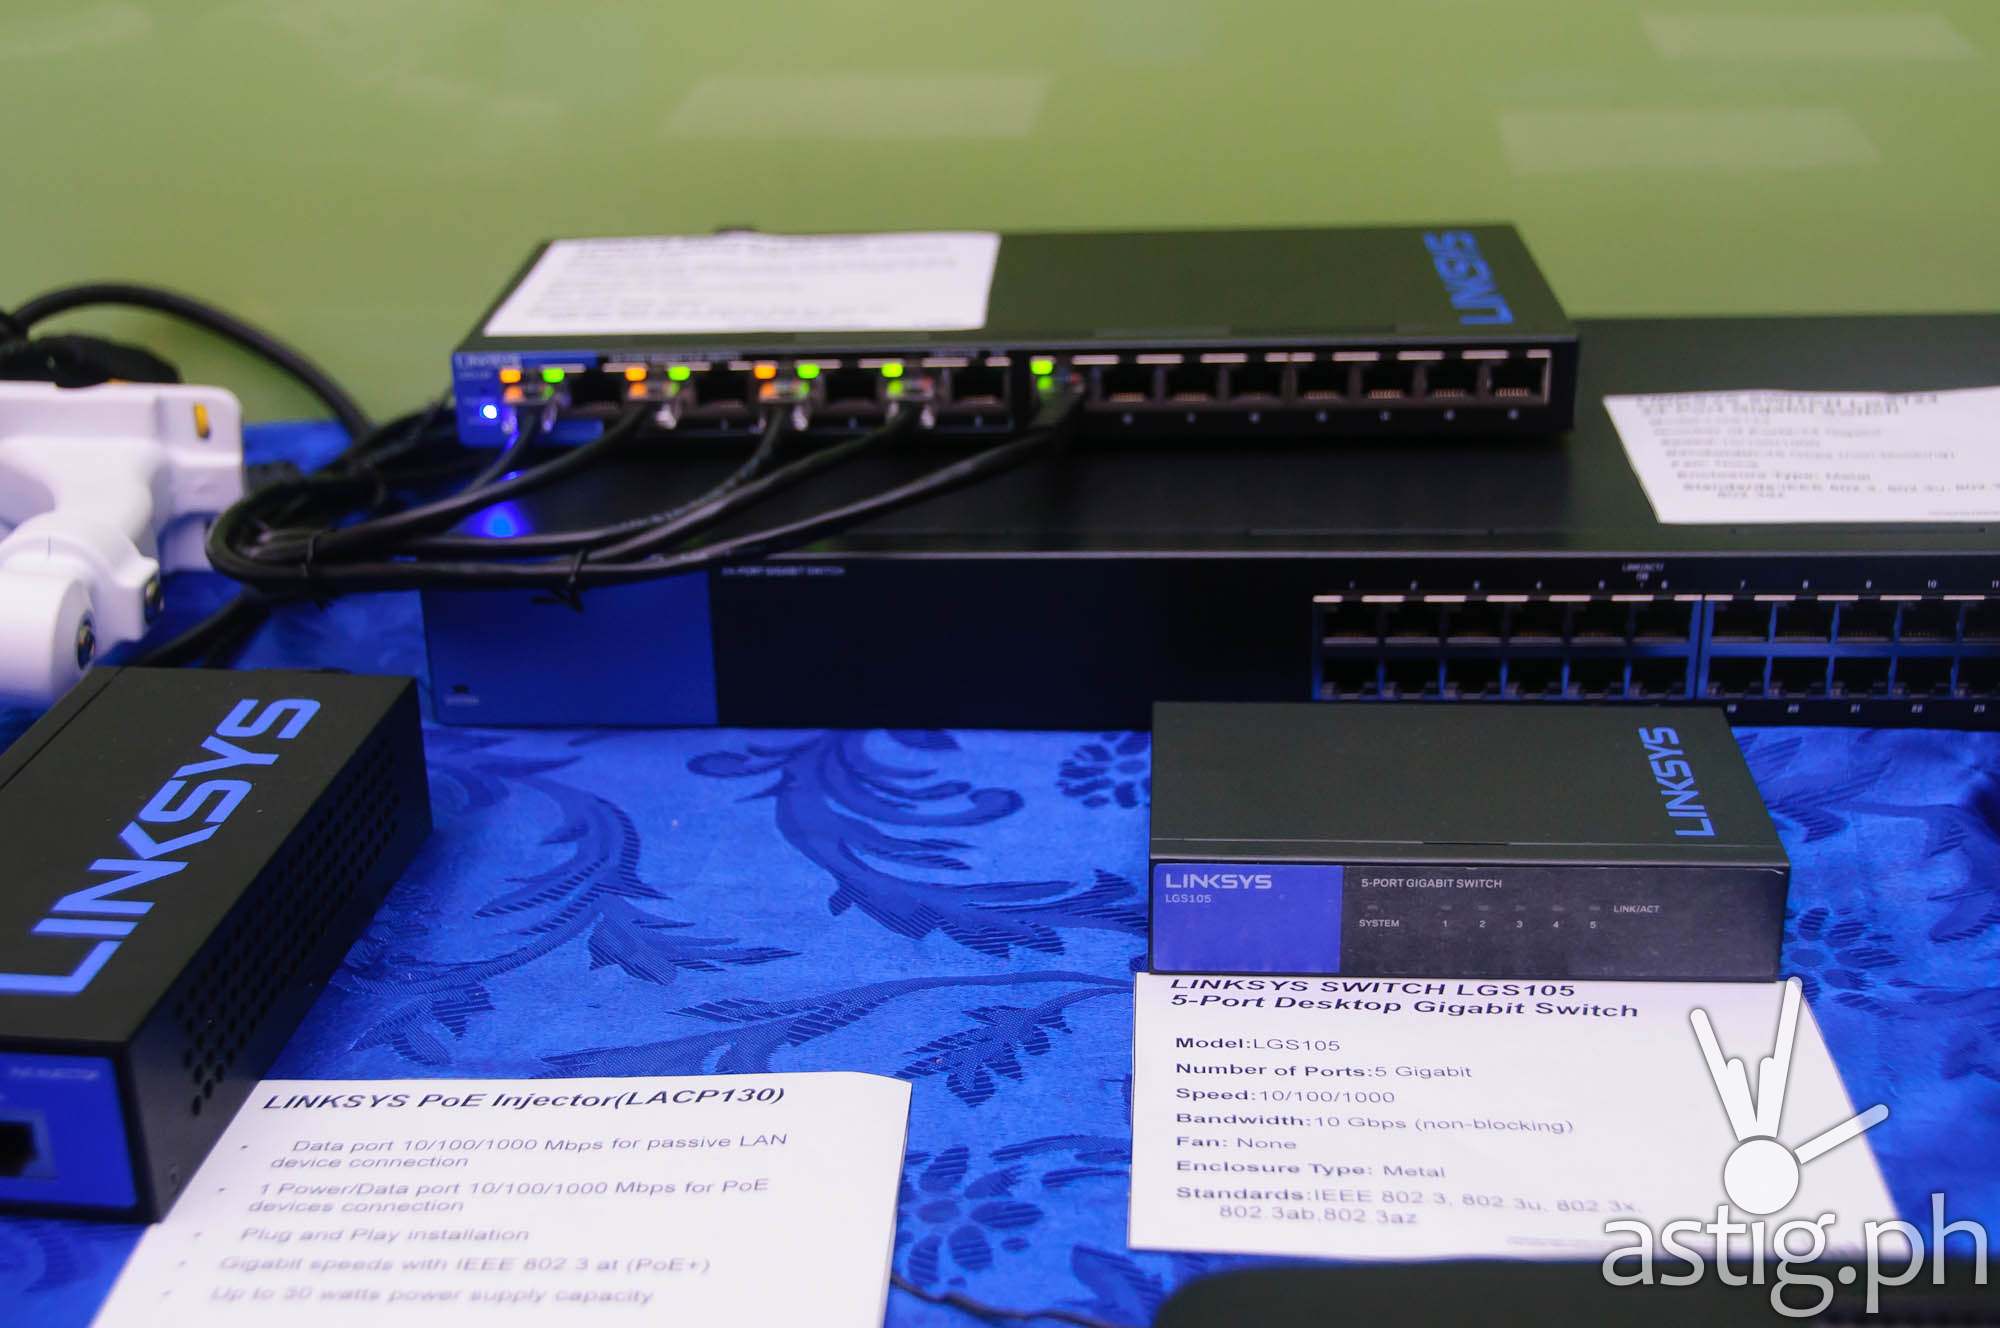 Linksys unmanaged switches and VPN routers